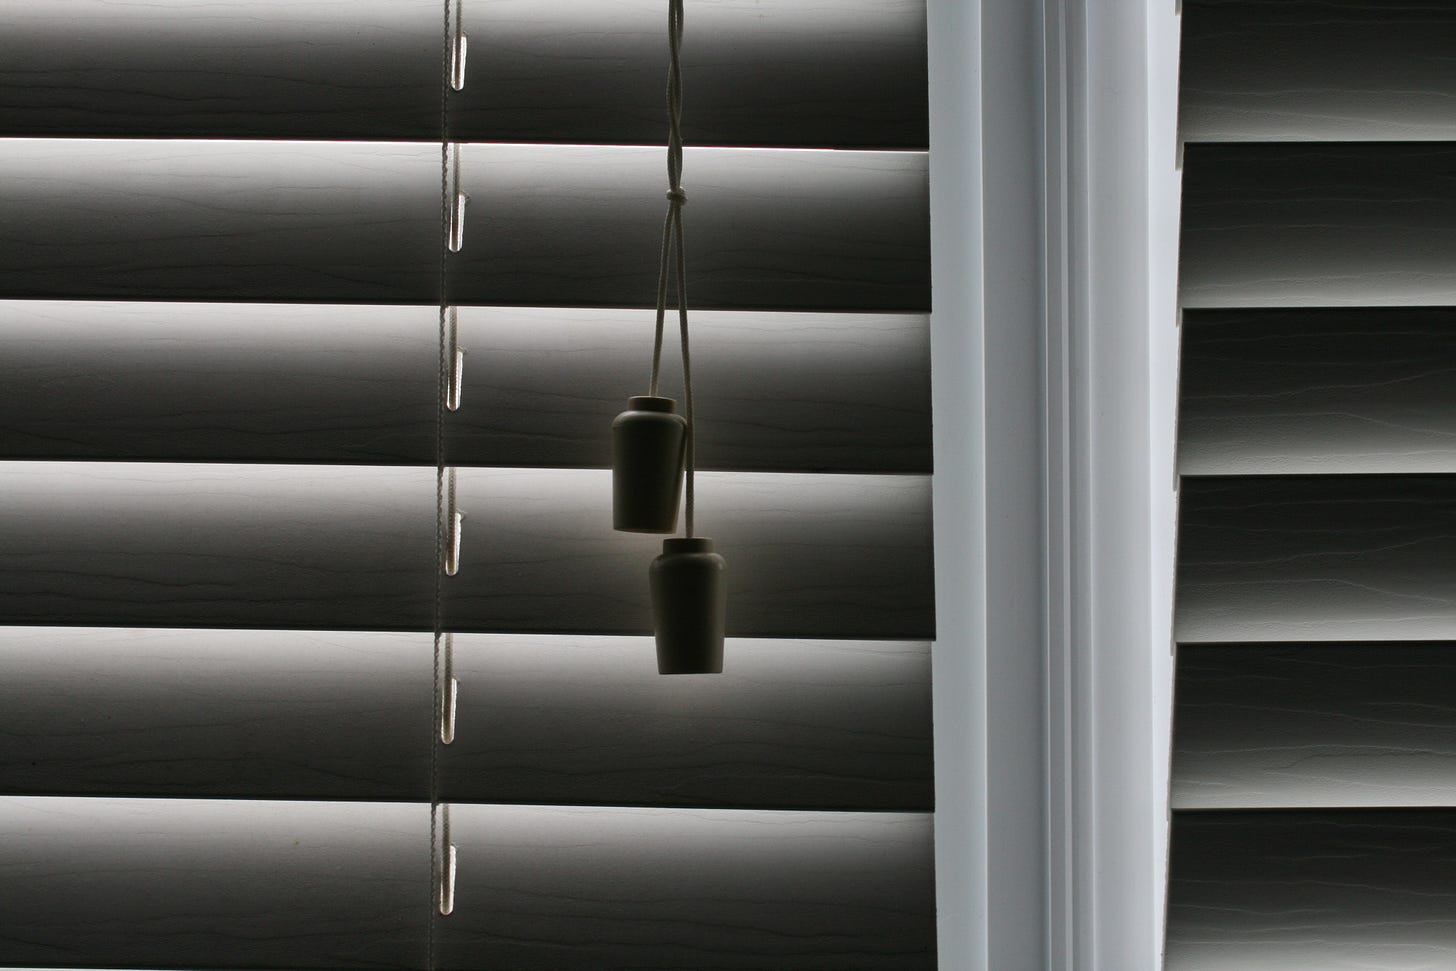 a grayscale photo of window blinds, close-up. The pull cord is visible, and the blinds are closed.